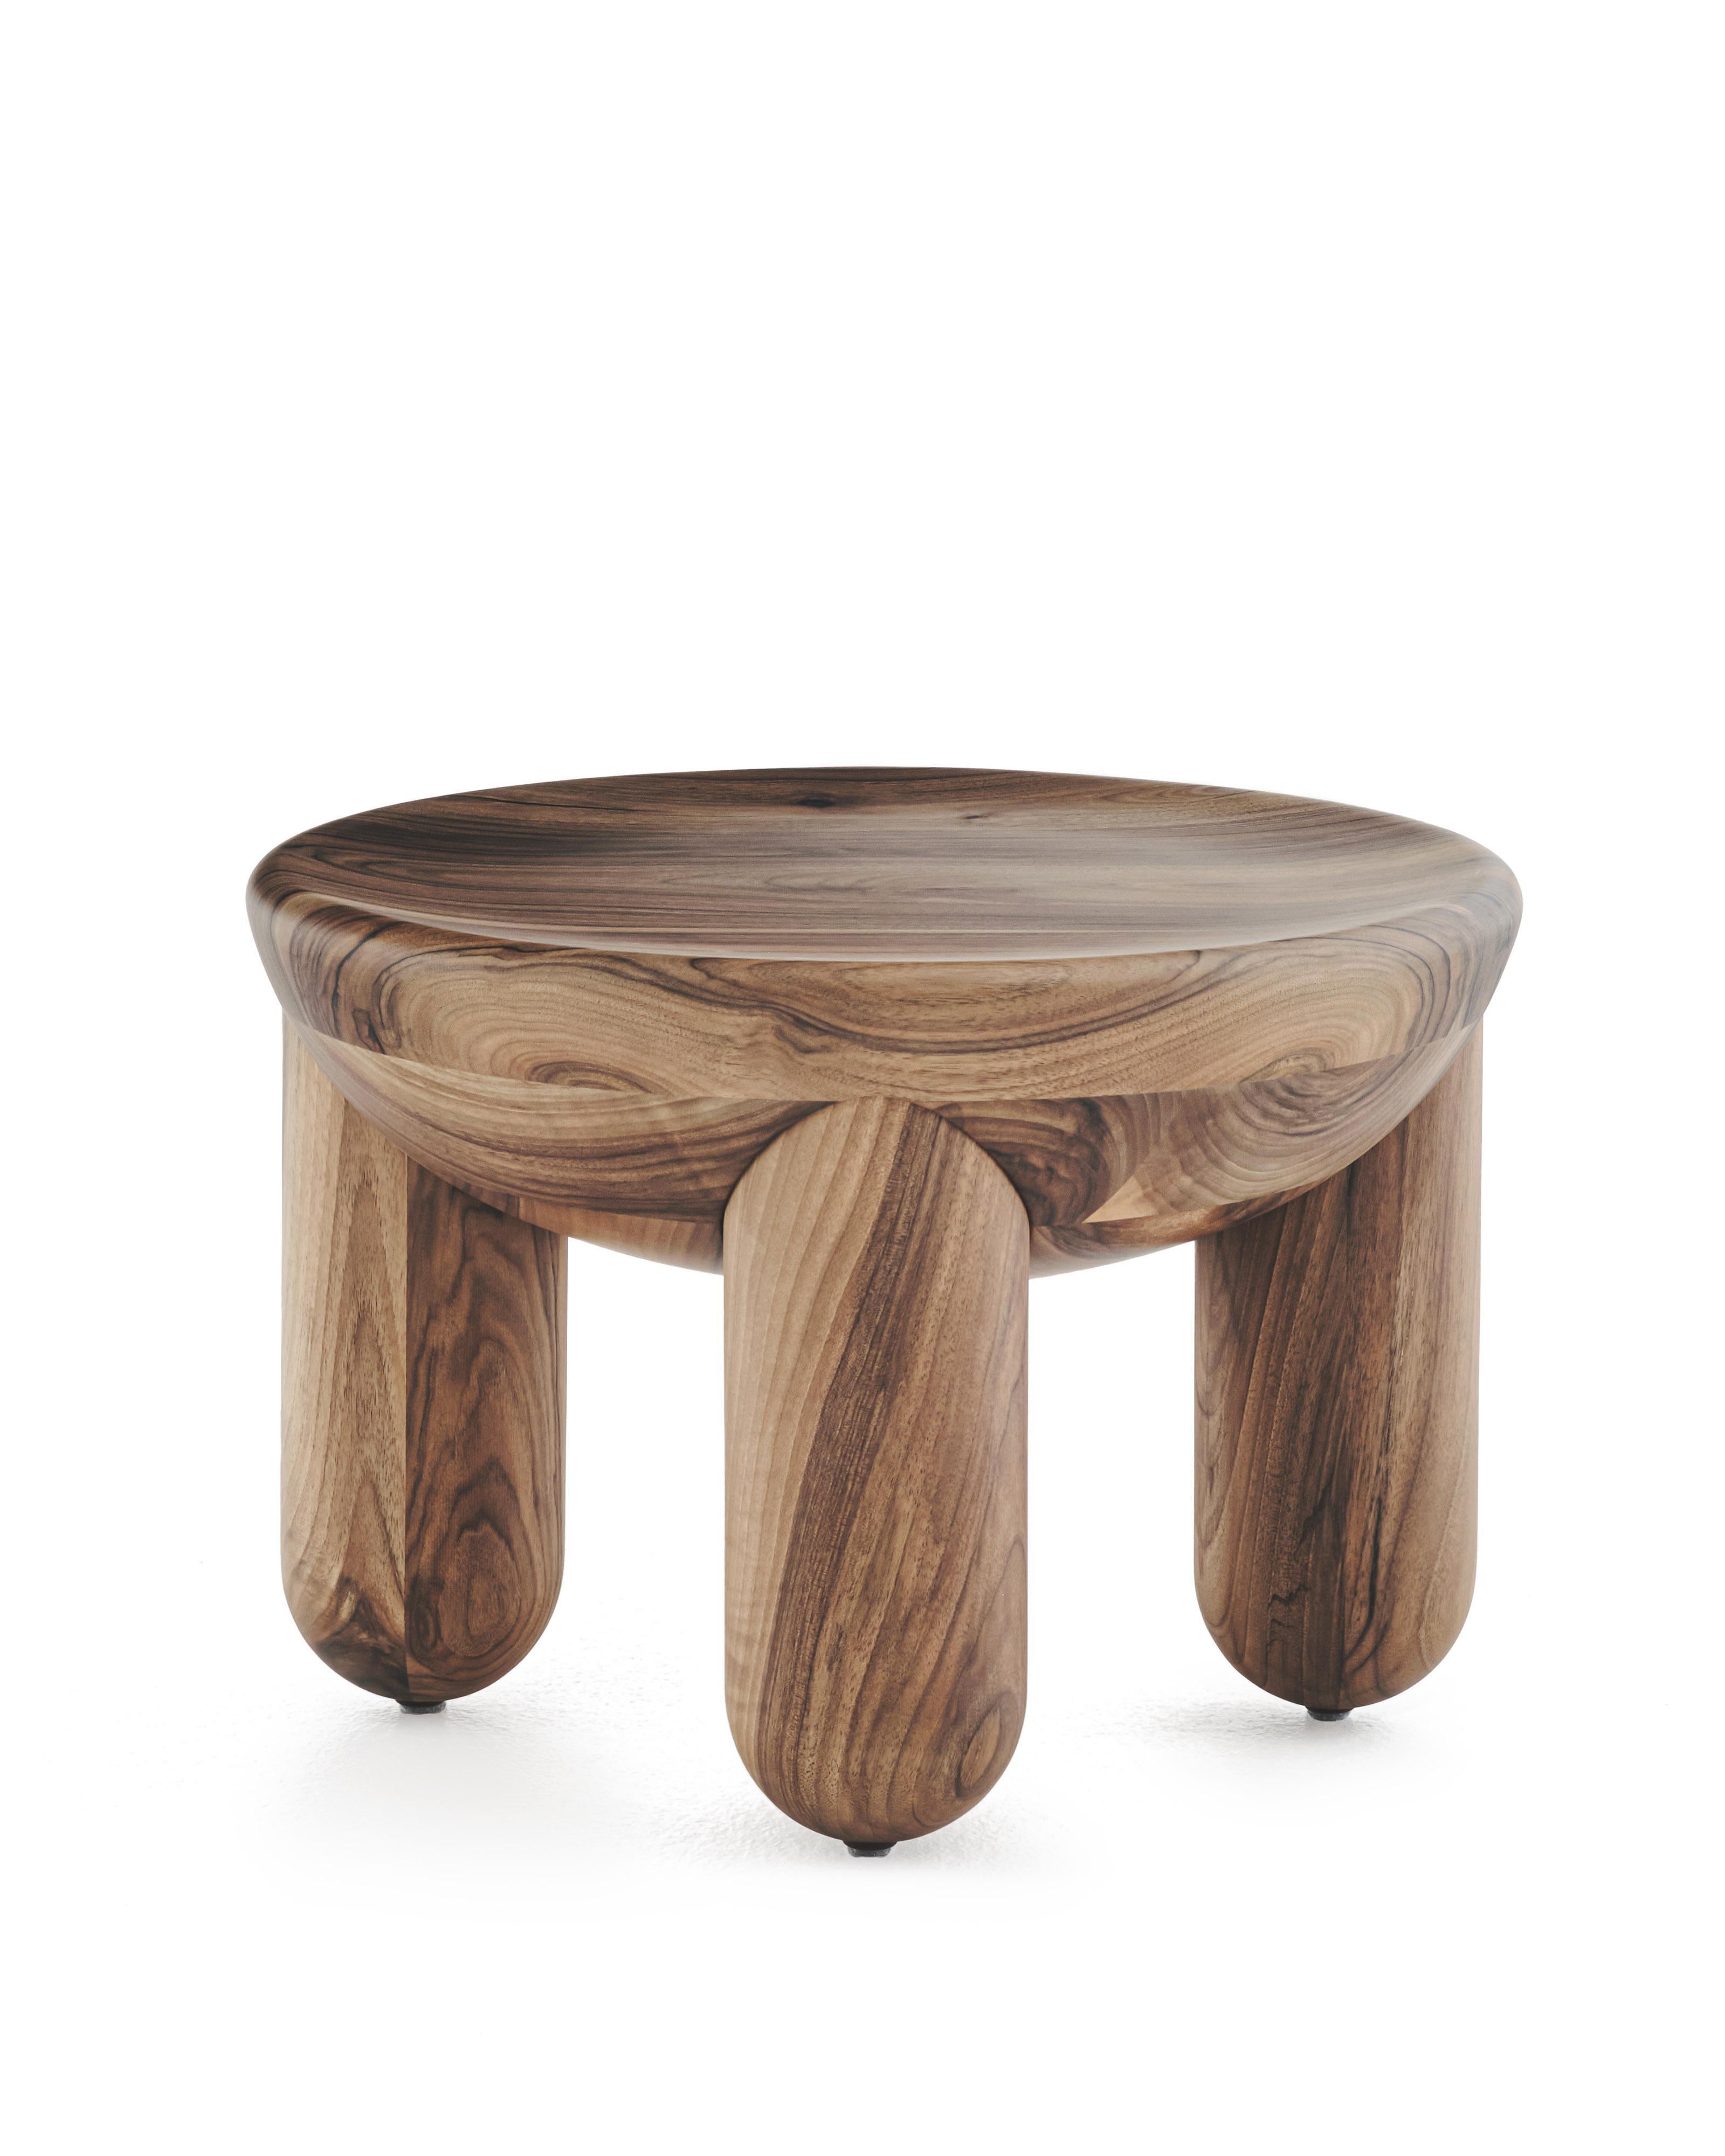 Contemporary Wooden Coffee or Side Table 'Freyja 1' by Noom, Brown Stained Ash For Sale 12